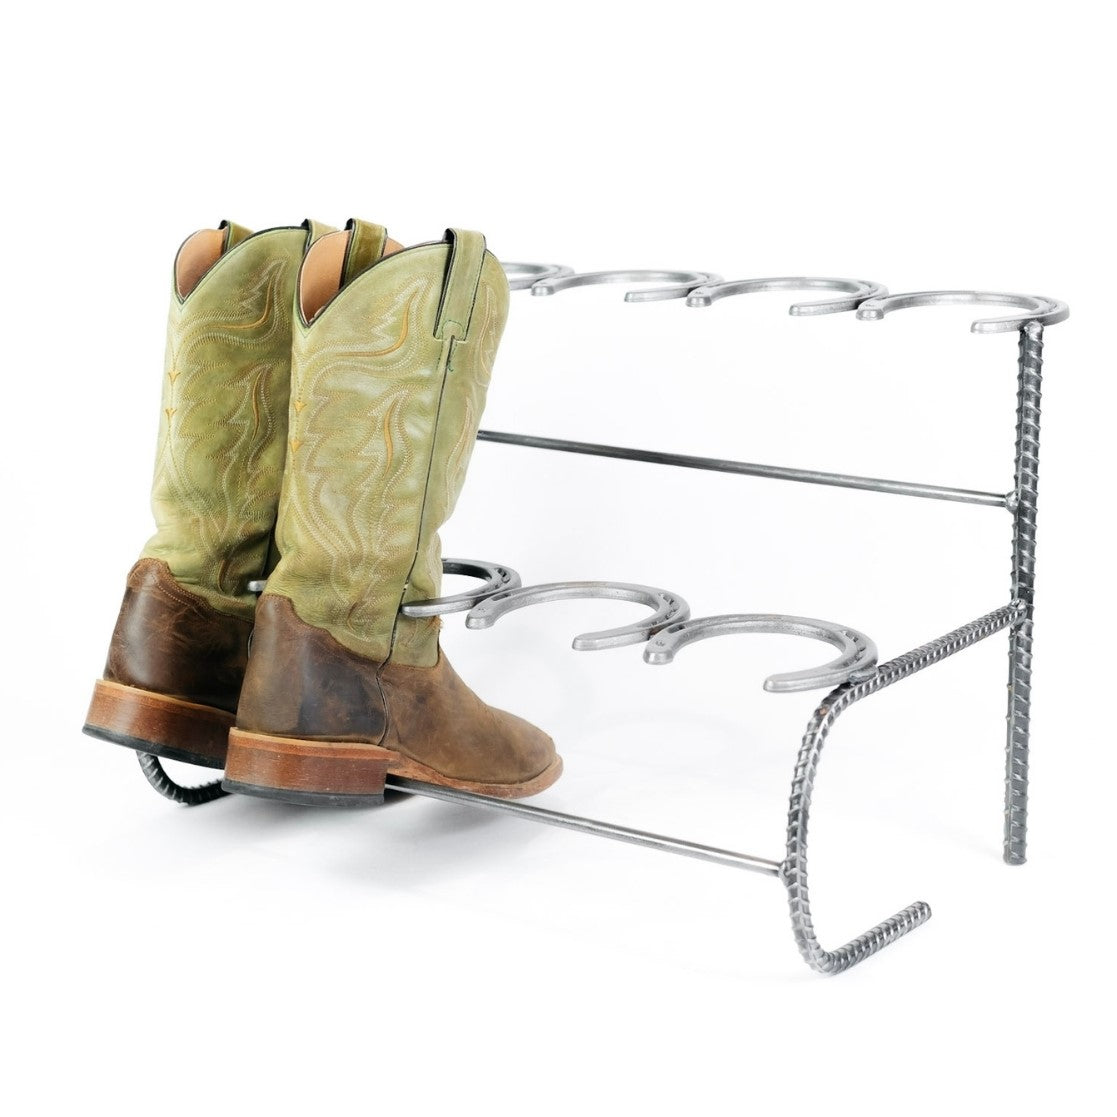 Rustic Standing Boot Rack Storage Made of Horseshoes Perfect for Organizing  Boots, Entryways, and Storage 6 Pairs the Heritage Forge 